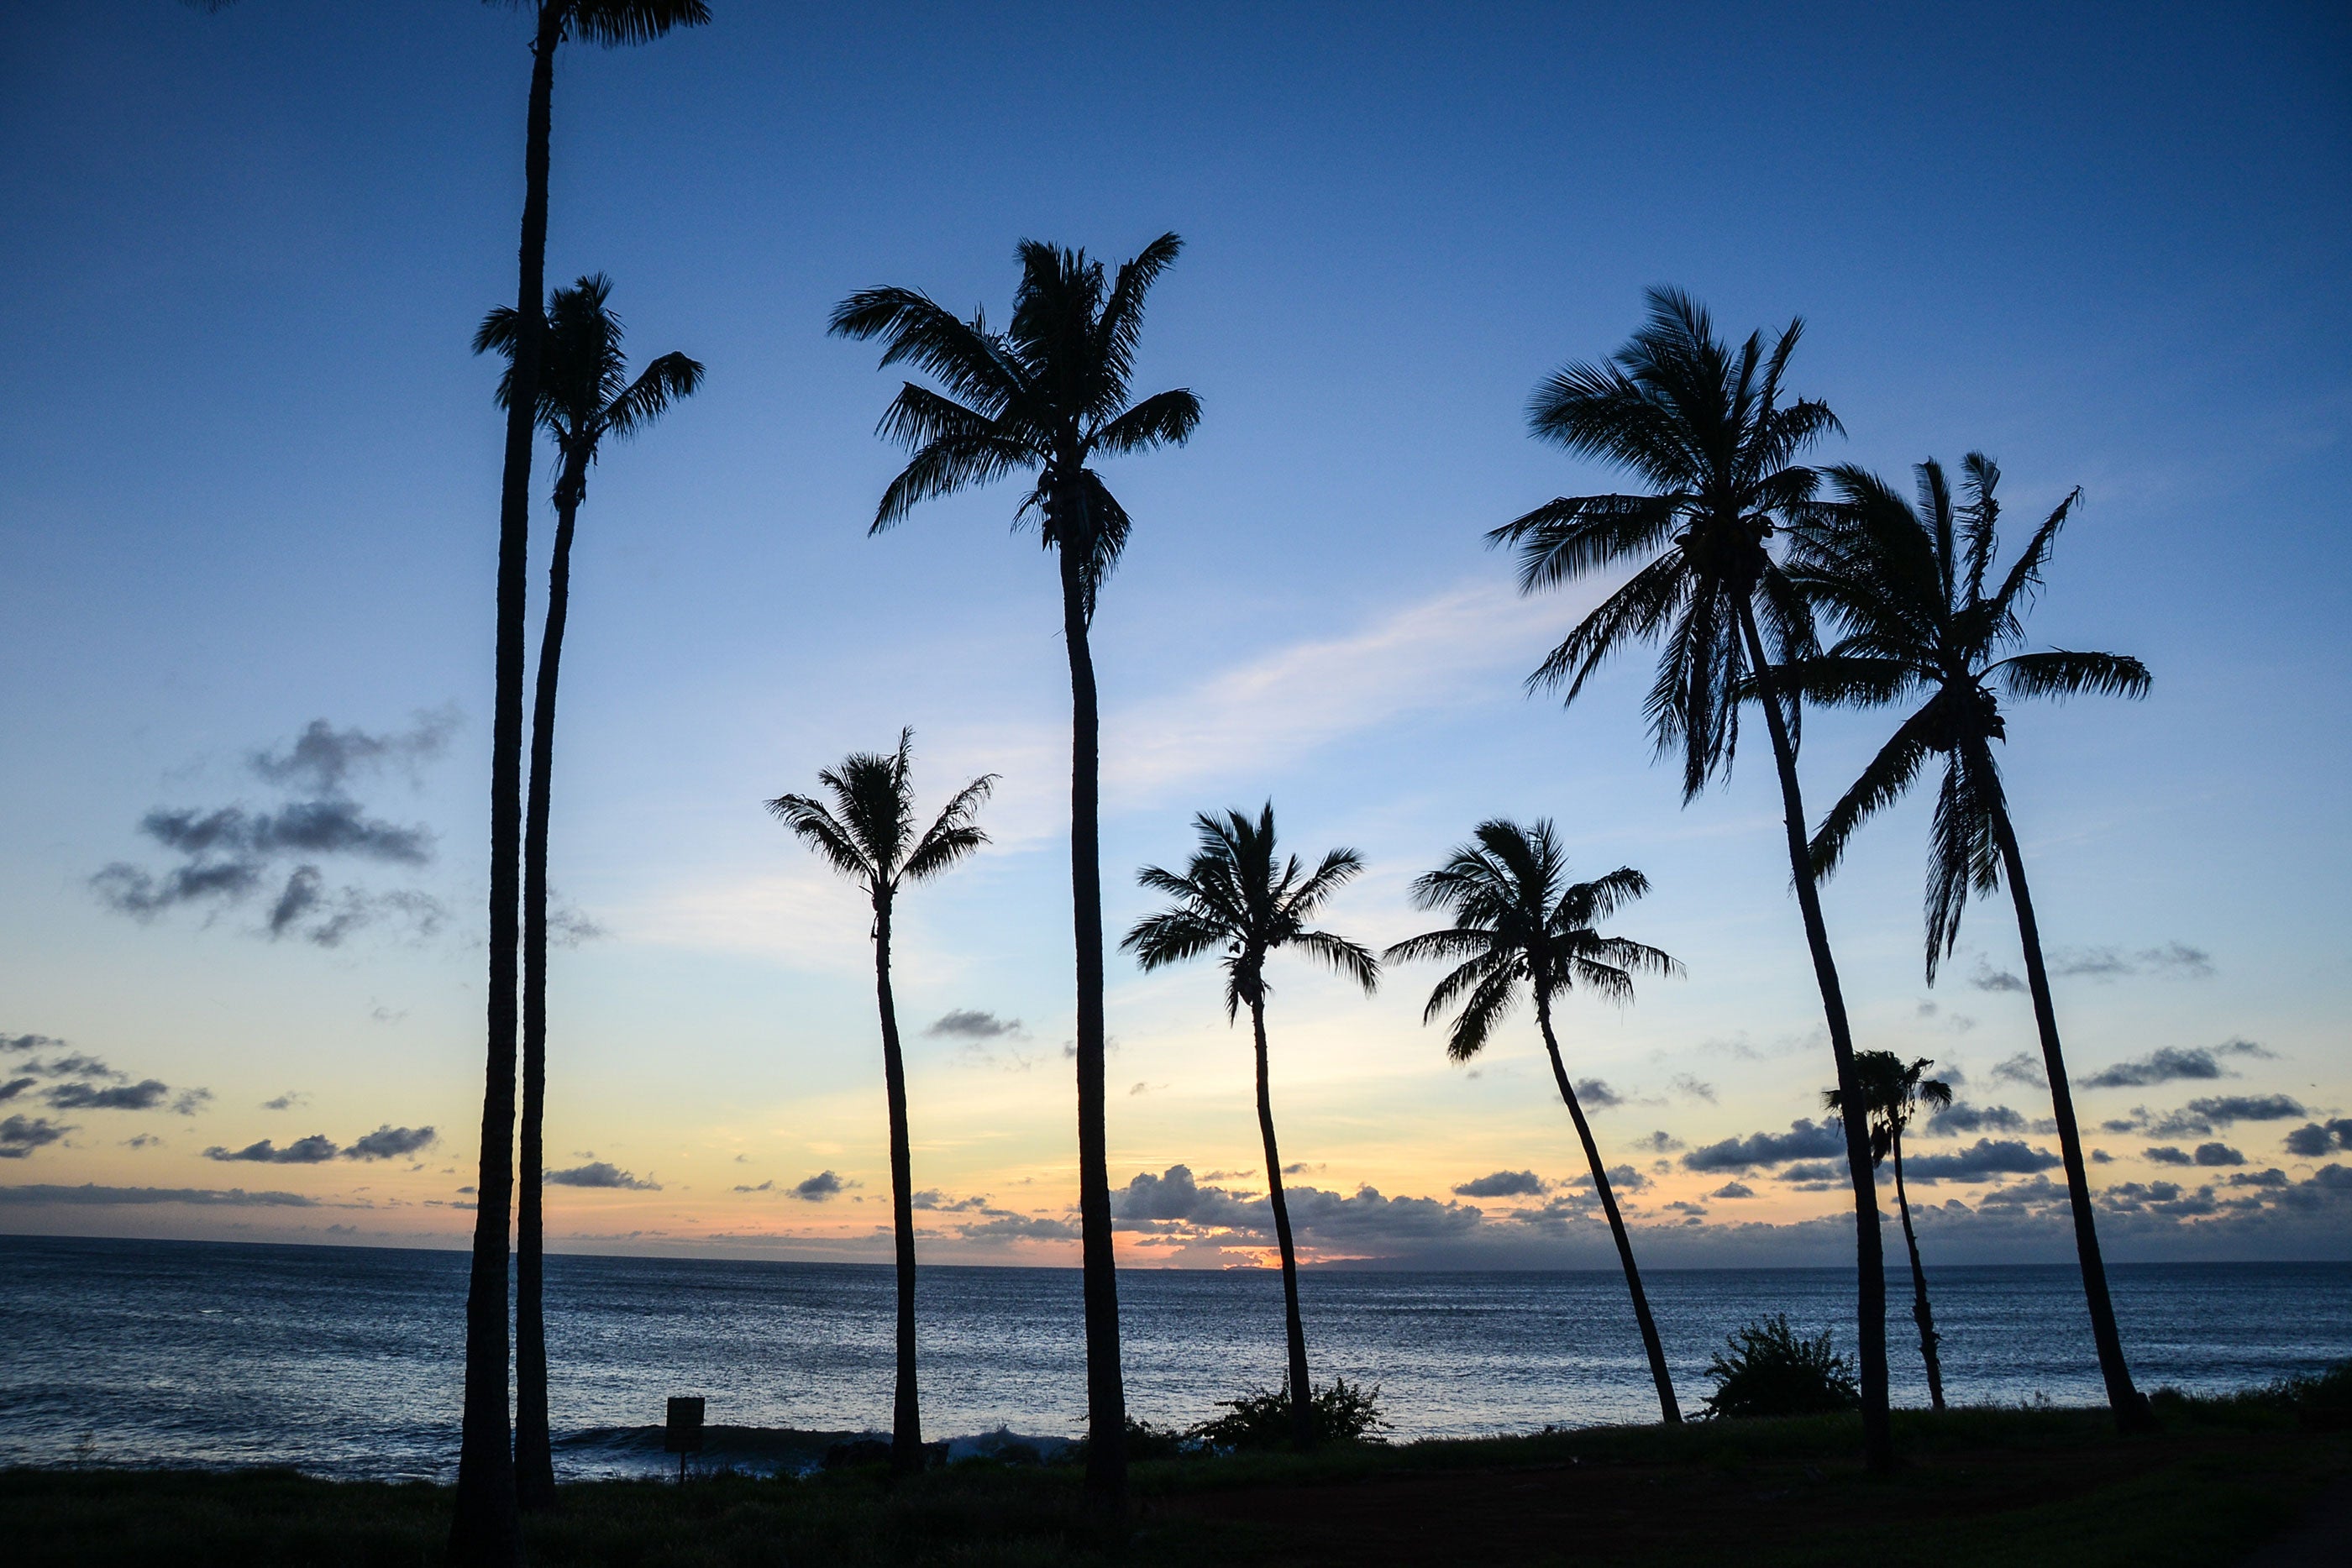 Sunsets from what used to be a Sheraton are spectacular in Molokai, Hawaii